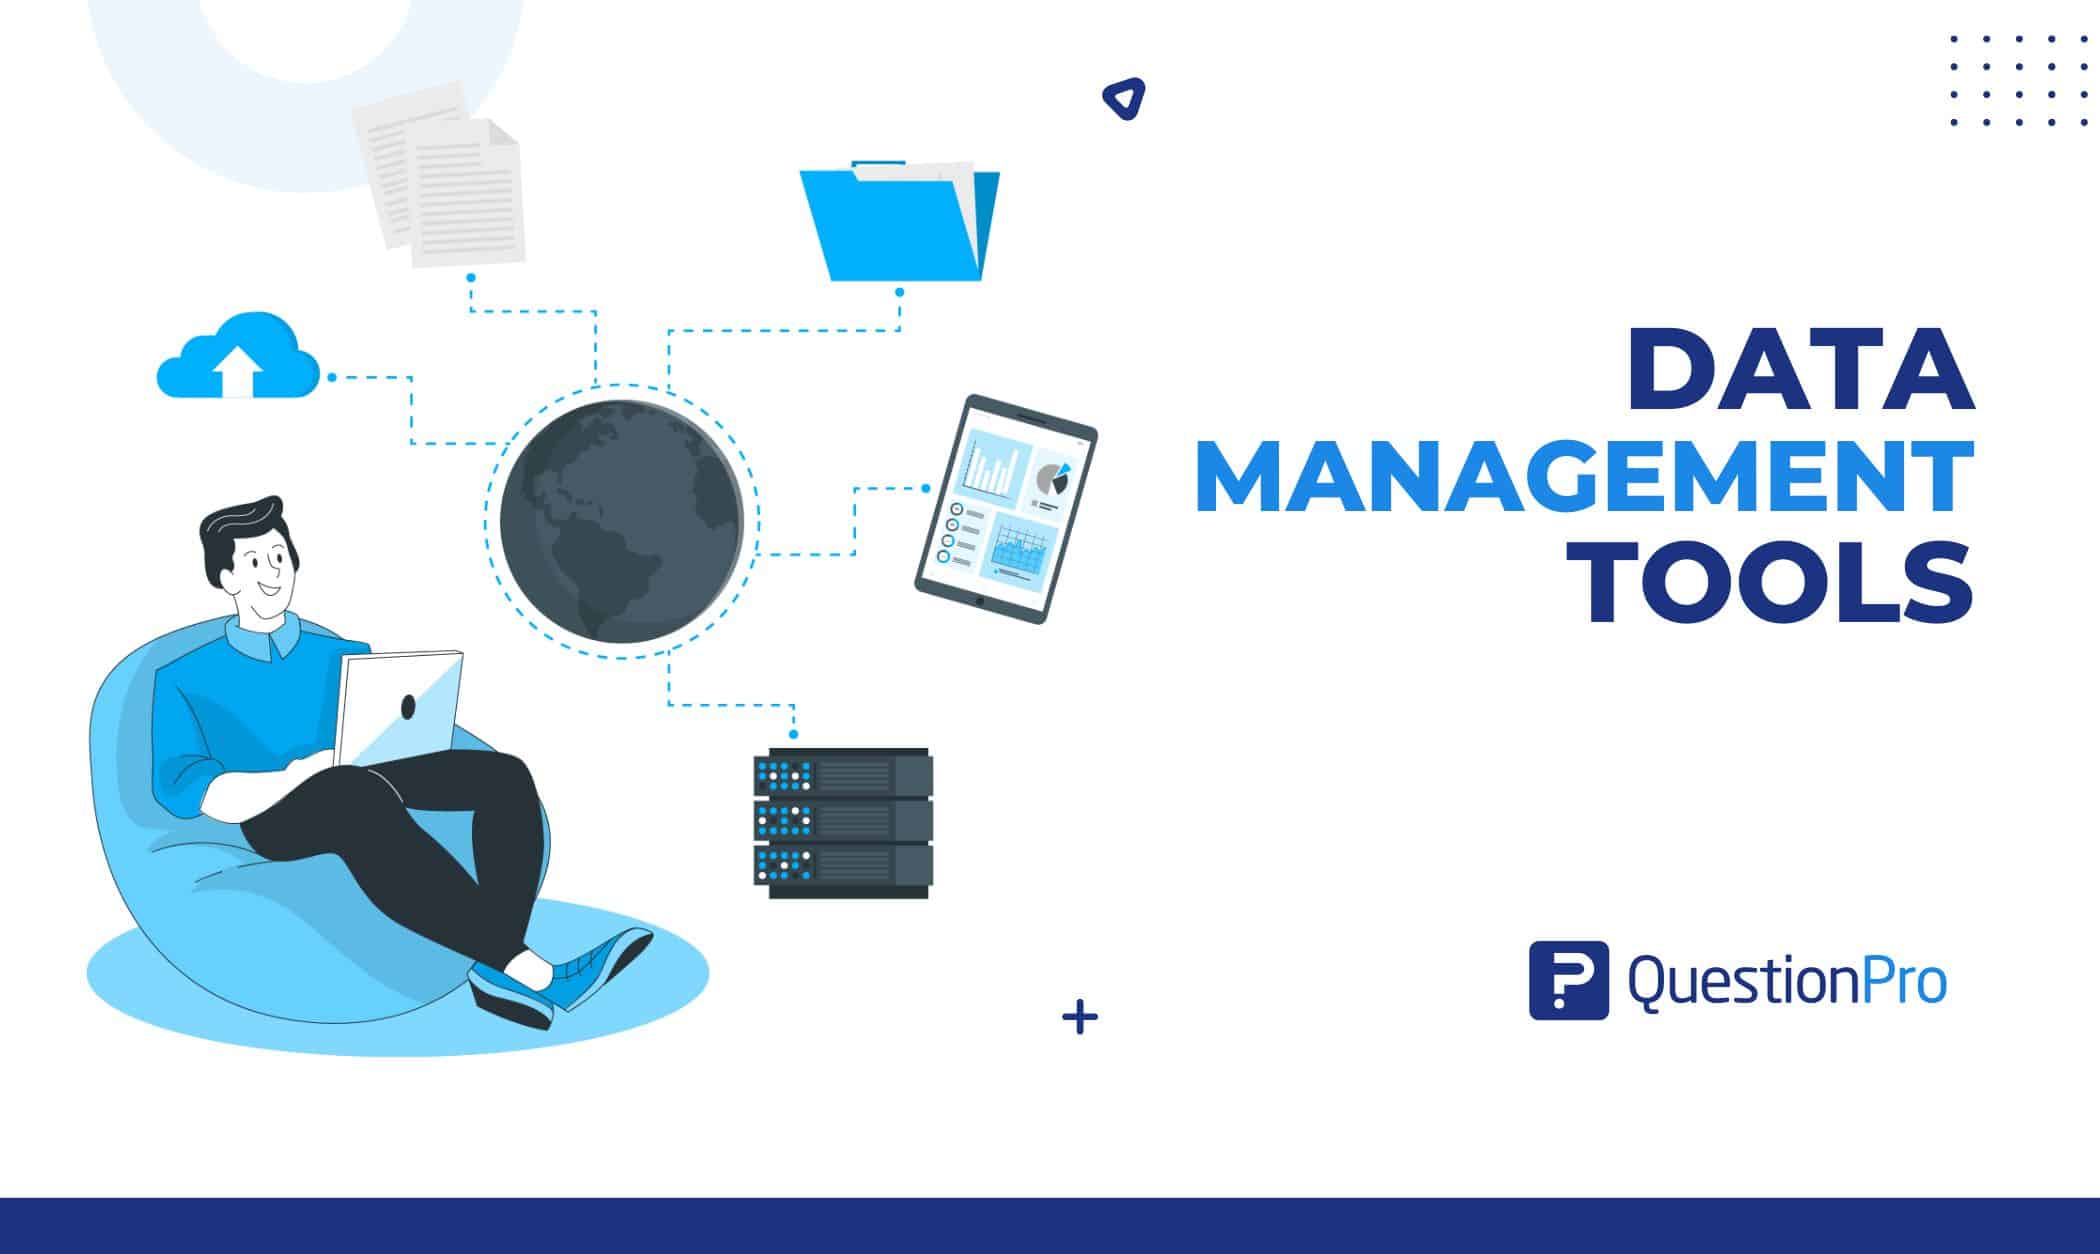 Data management tools can archive, back up, restore, search, and more. These solutions let companies manage data across multi-cloud setups.